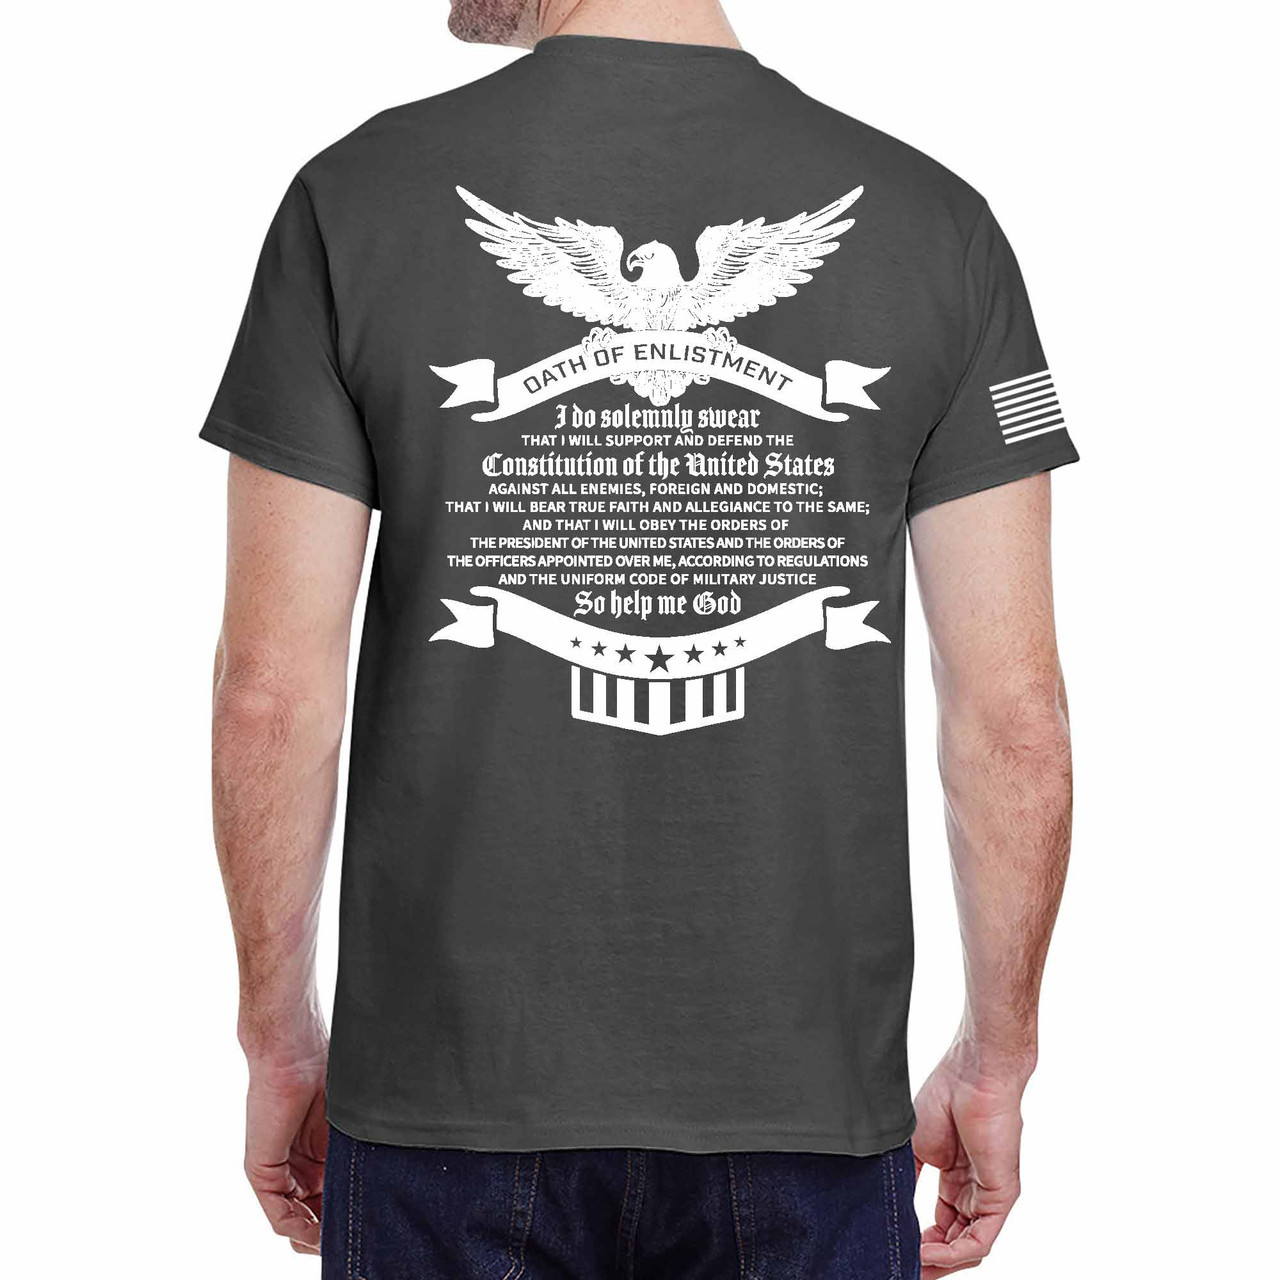 Oath of Enlistment T-Shirt back in charcoal